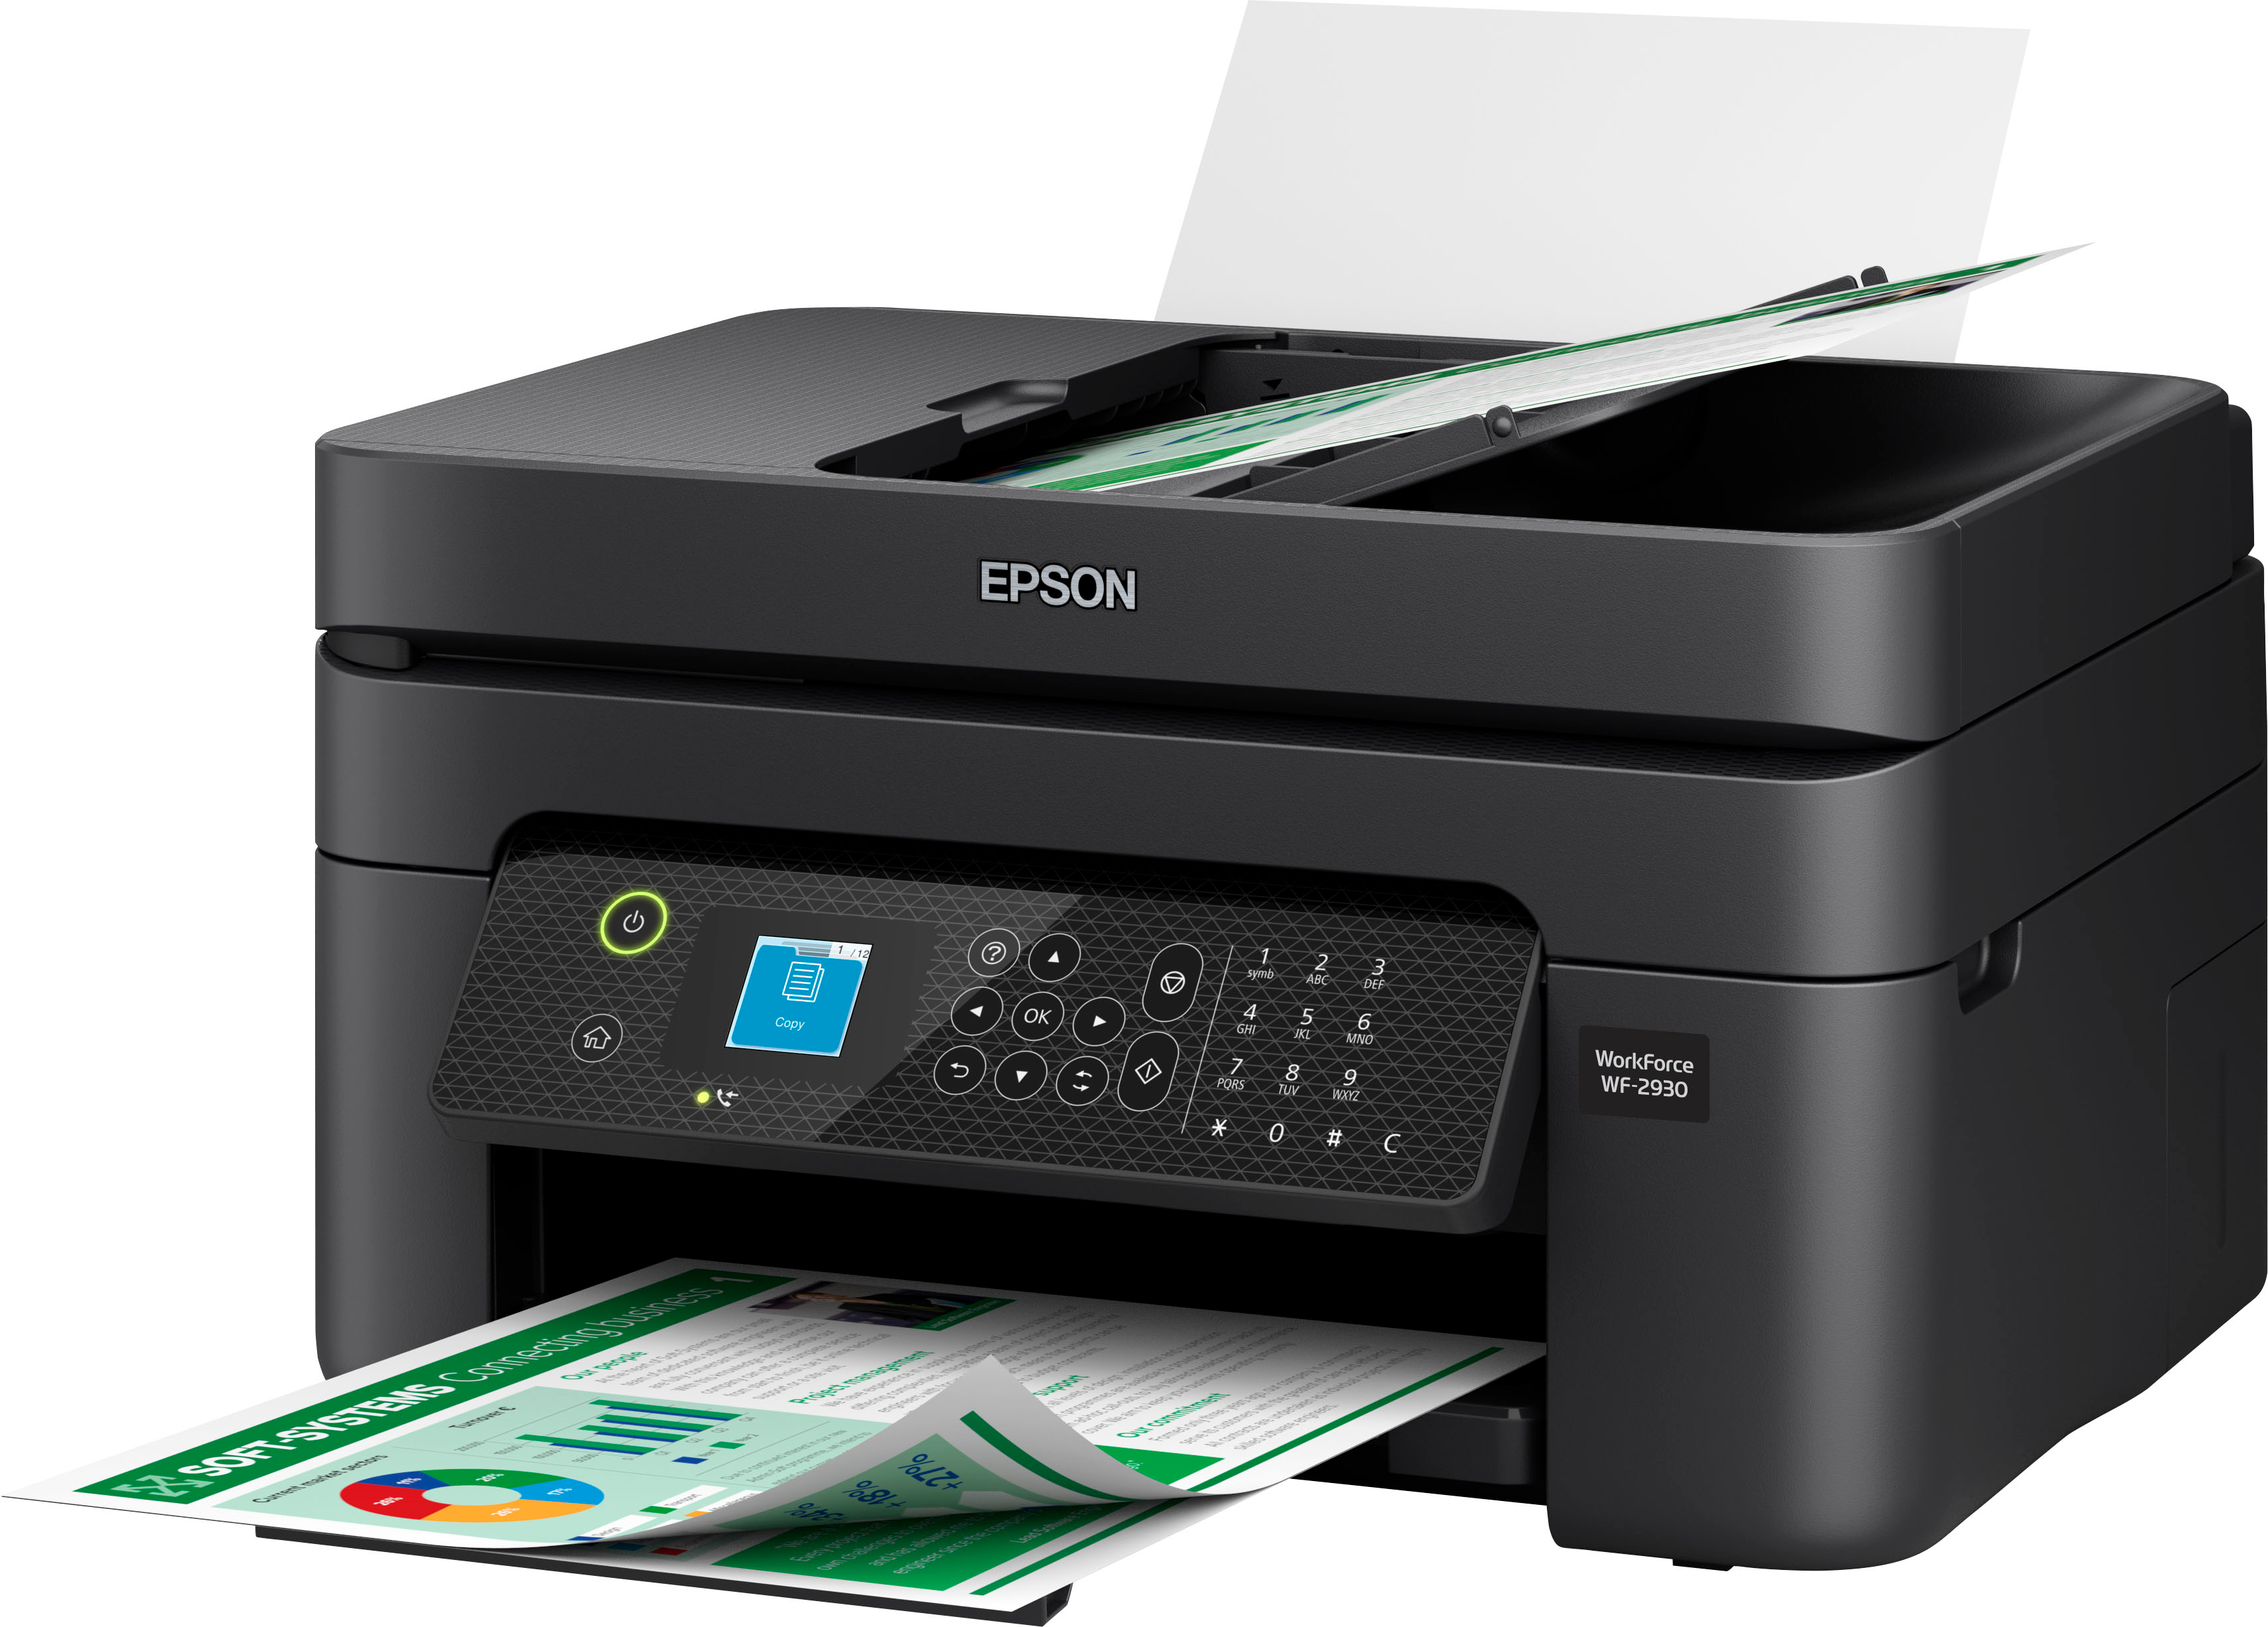 Left View: Epson WorkForce WF-2930 Wireless All-in-One Printer with Scan, Copy, Fax, Auto Document Feeder, Automatic 2-Sided Printing and 1.4" Color Display